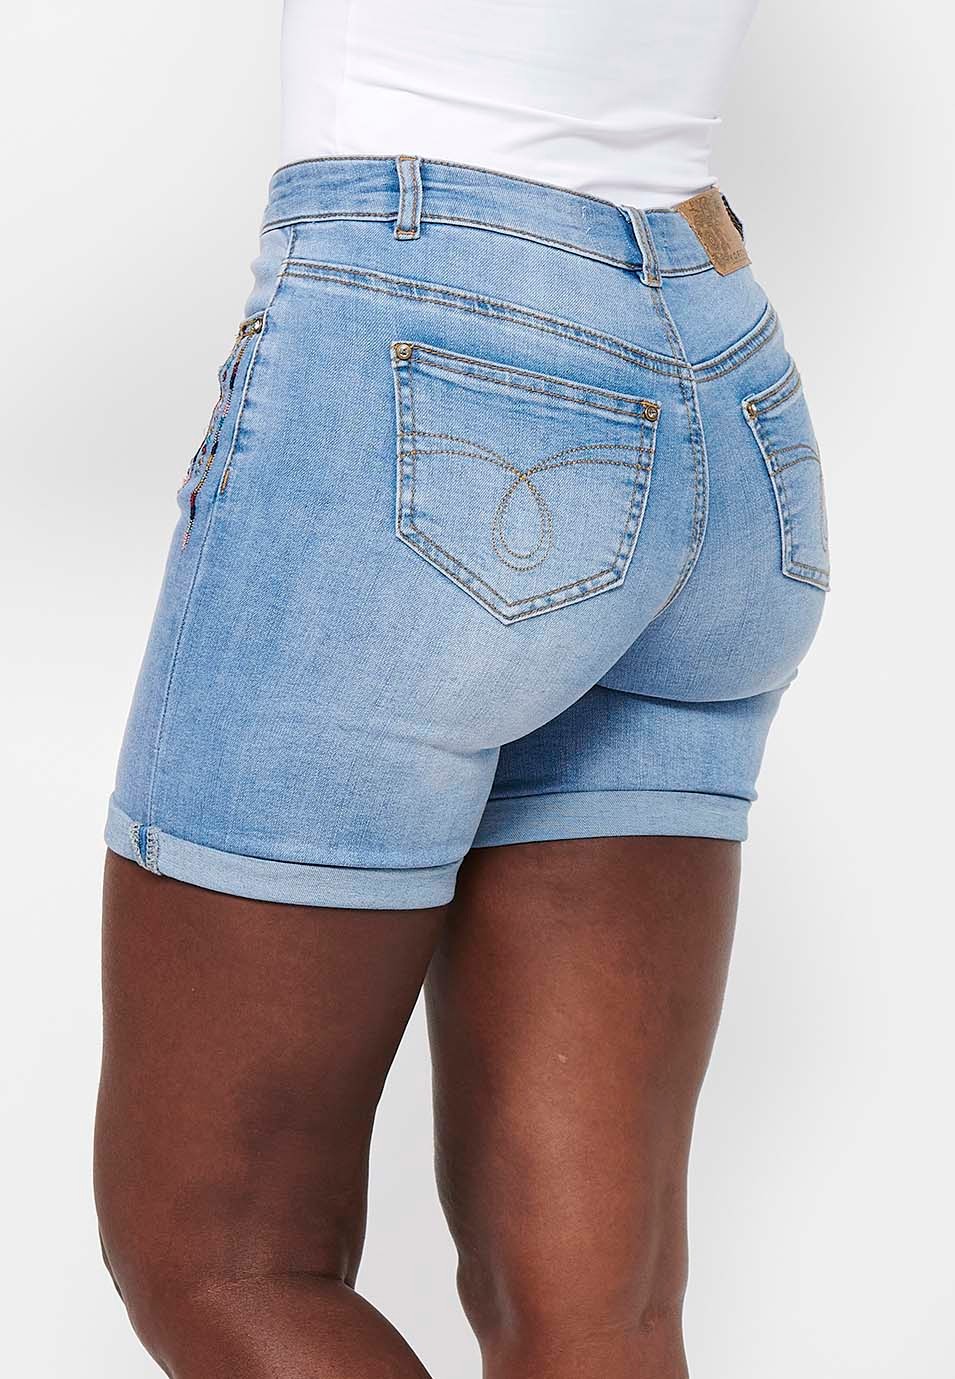 Shorts with cuffed finish with front zipper and button closure with embroidered details in Blue for Women 7